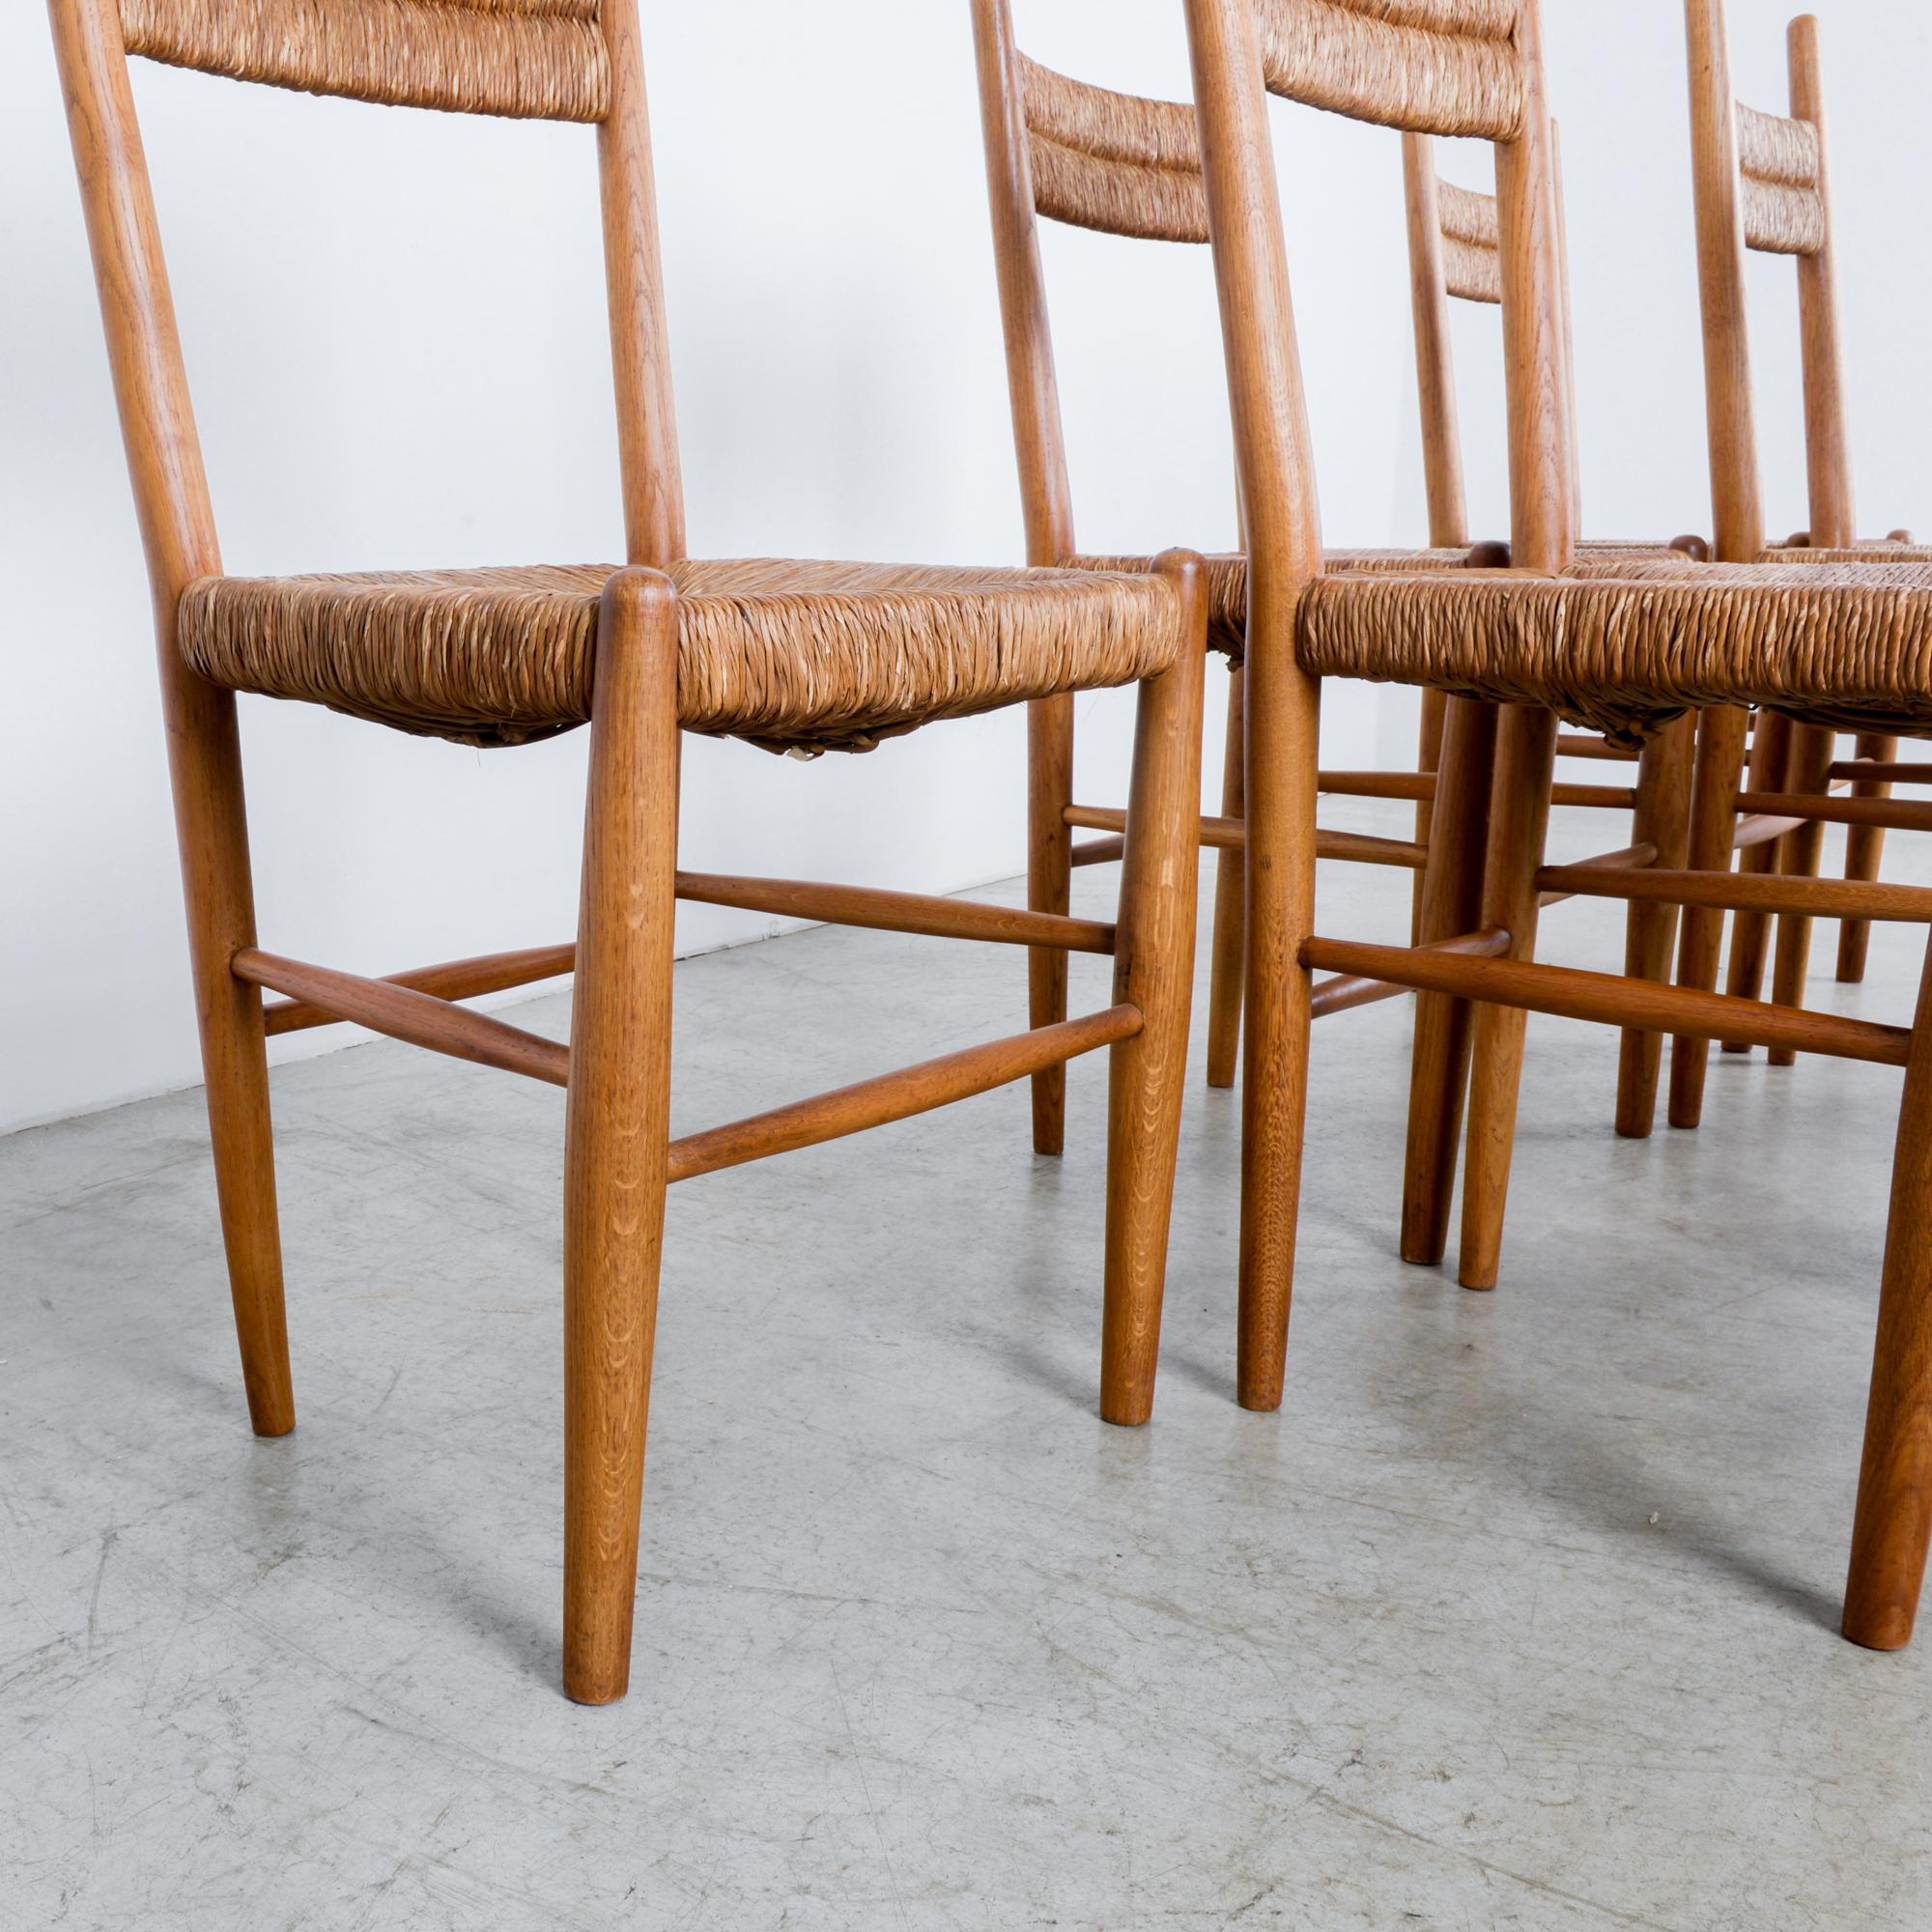 Wicker 1960s French Oak Chairs with Woven Seats and Backs, Set of Six